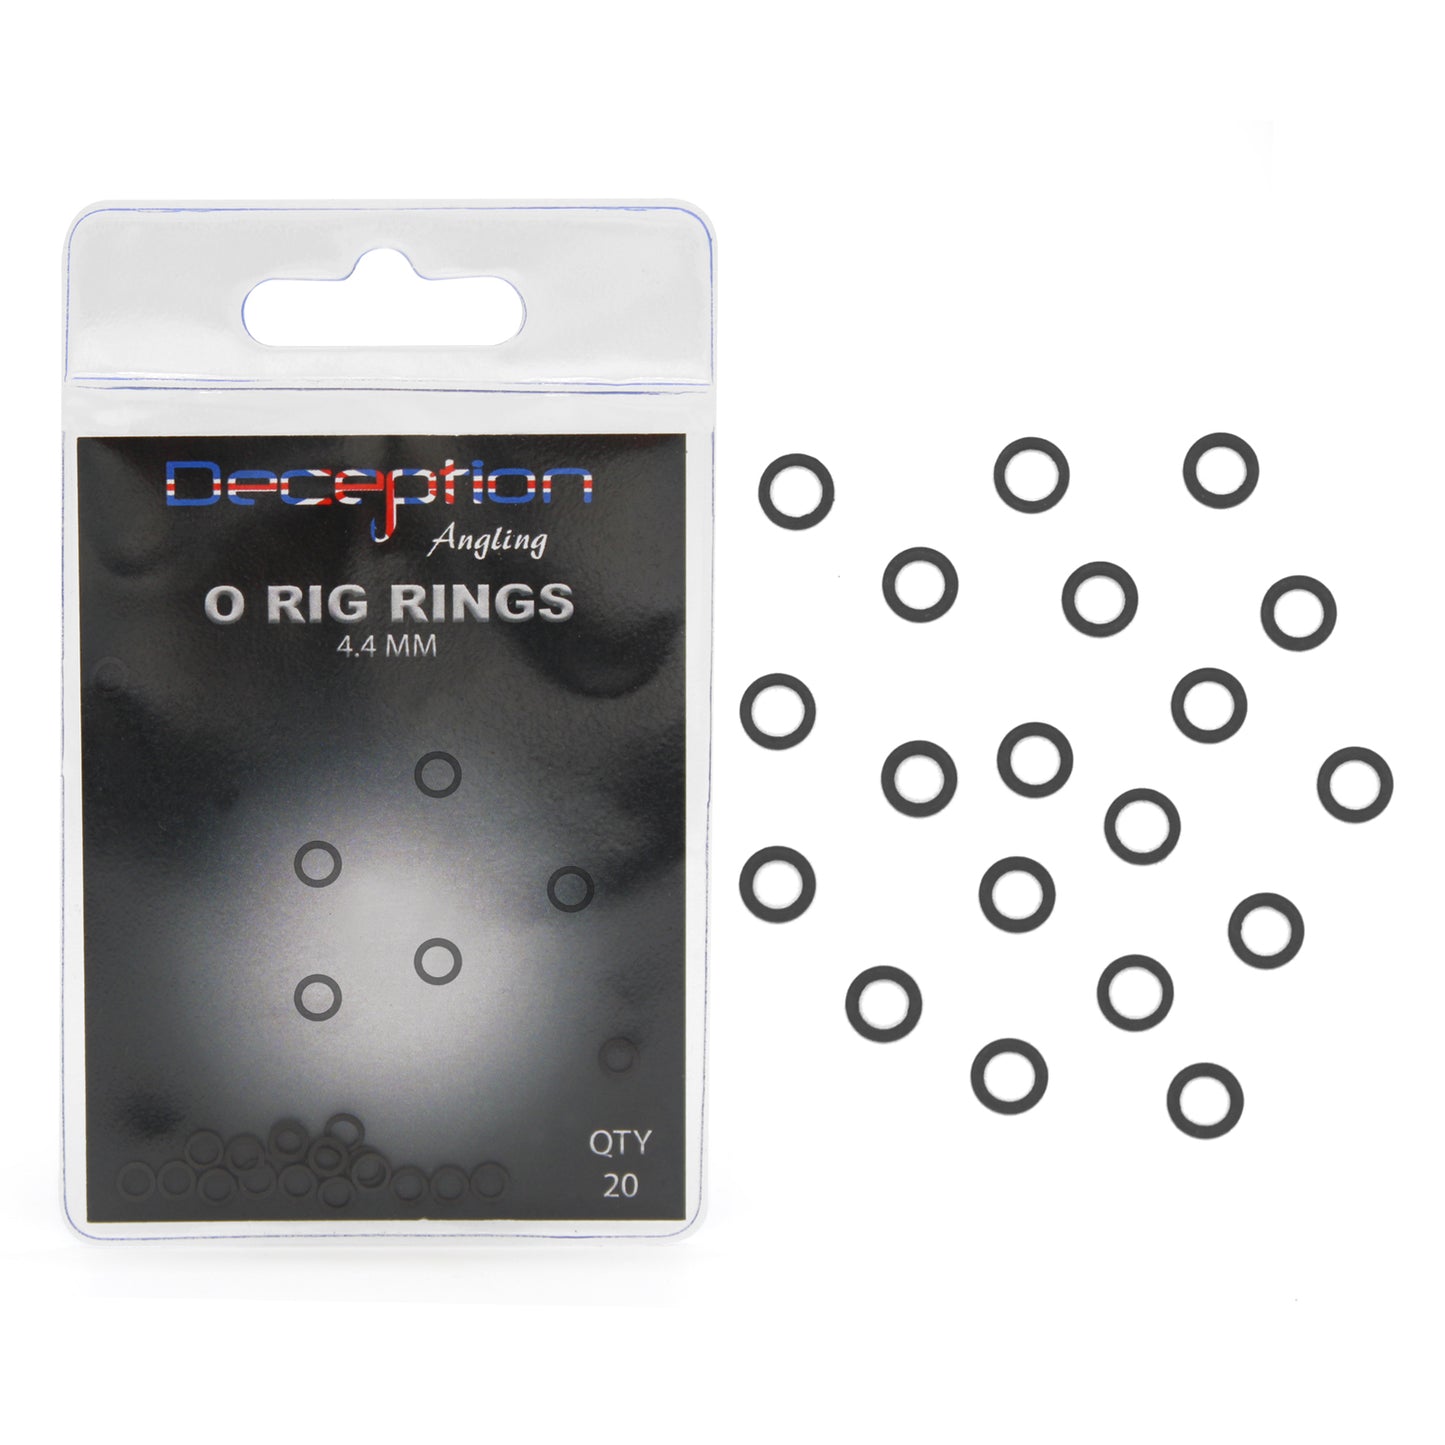 Deception Angling O Rig Rings 4.4mm for Fishing Pack of 20